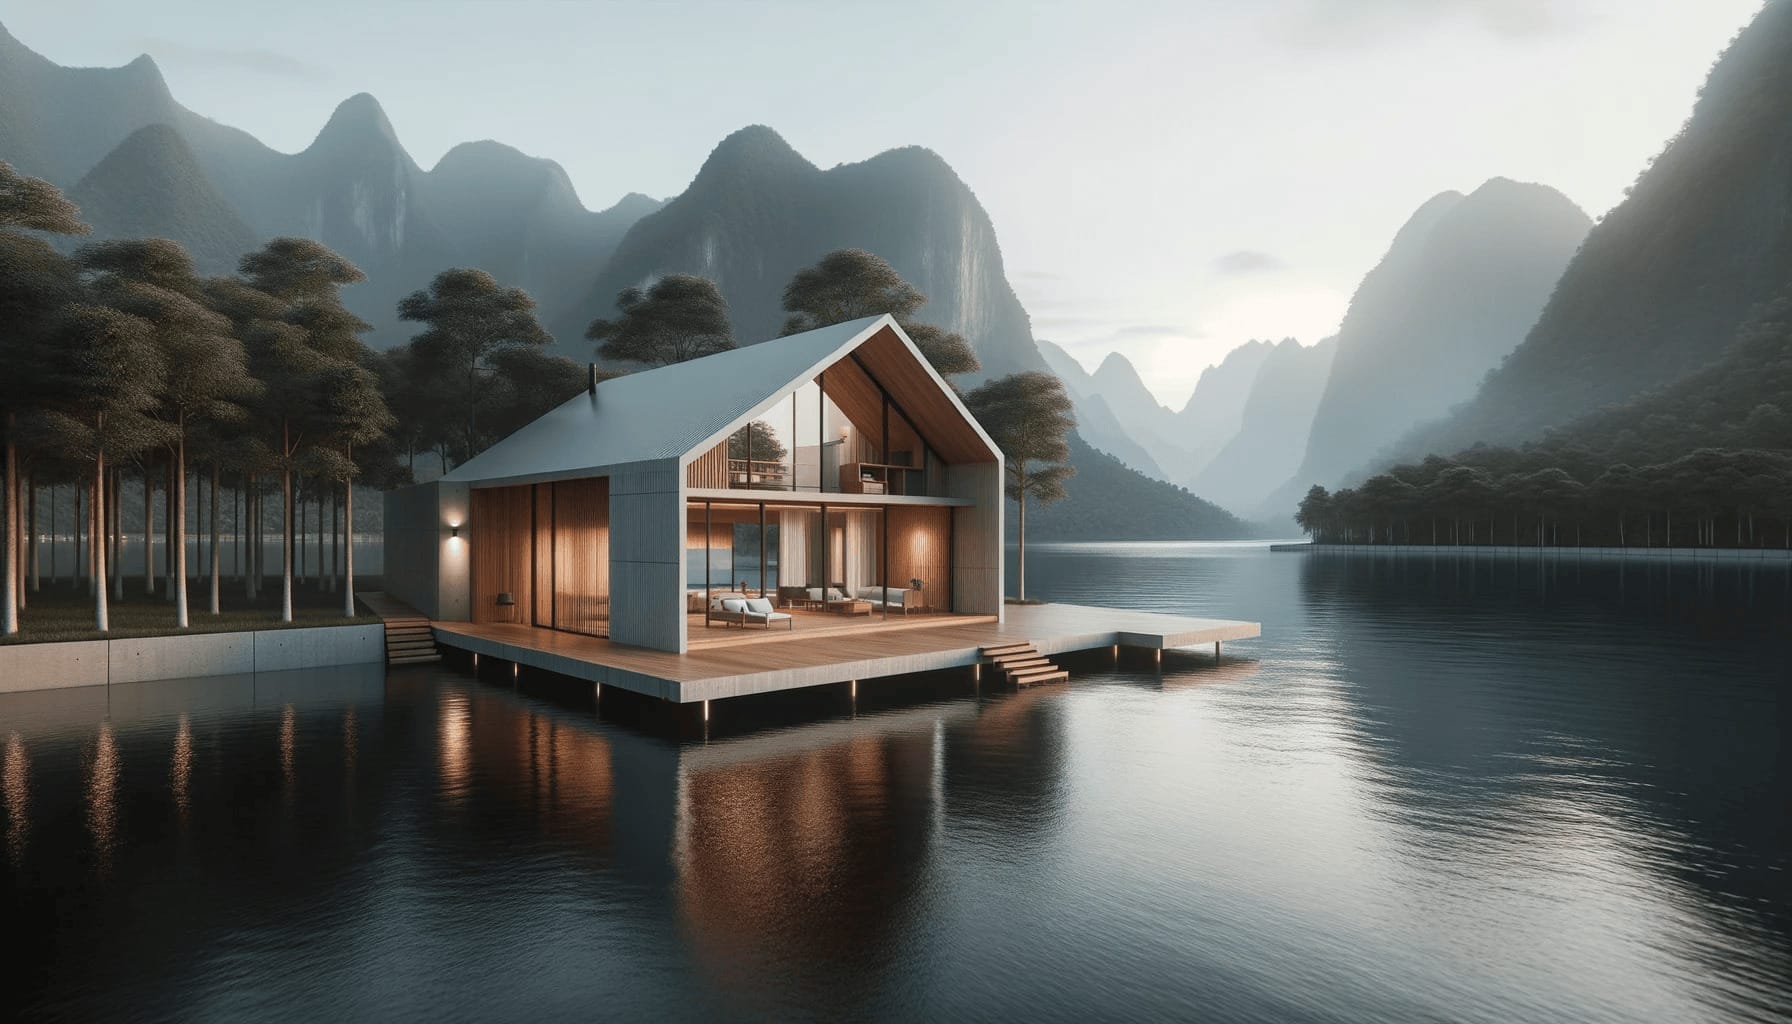 DALL·E 2023 10 19 09.12.08 Photo of a sleek modern cabin house by a serene lake with mountains in the background. The cabin stands out with its minimalist architecture and woode